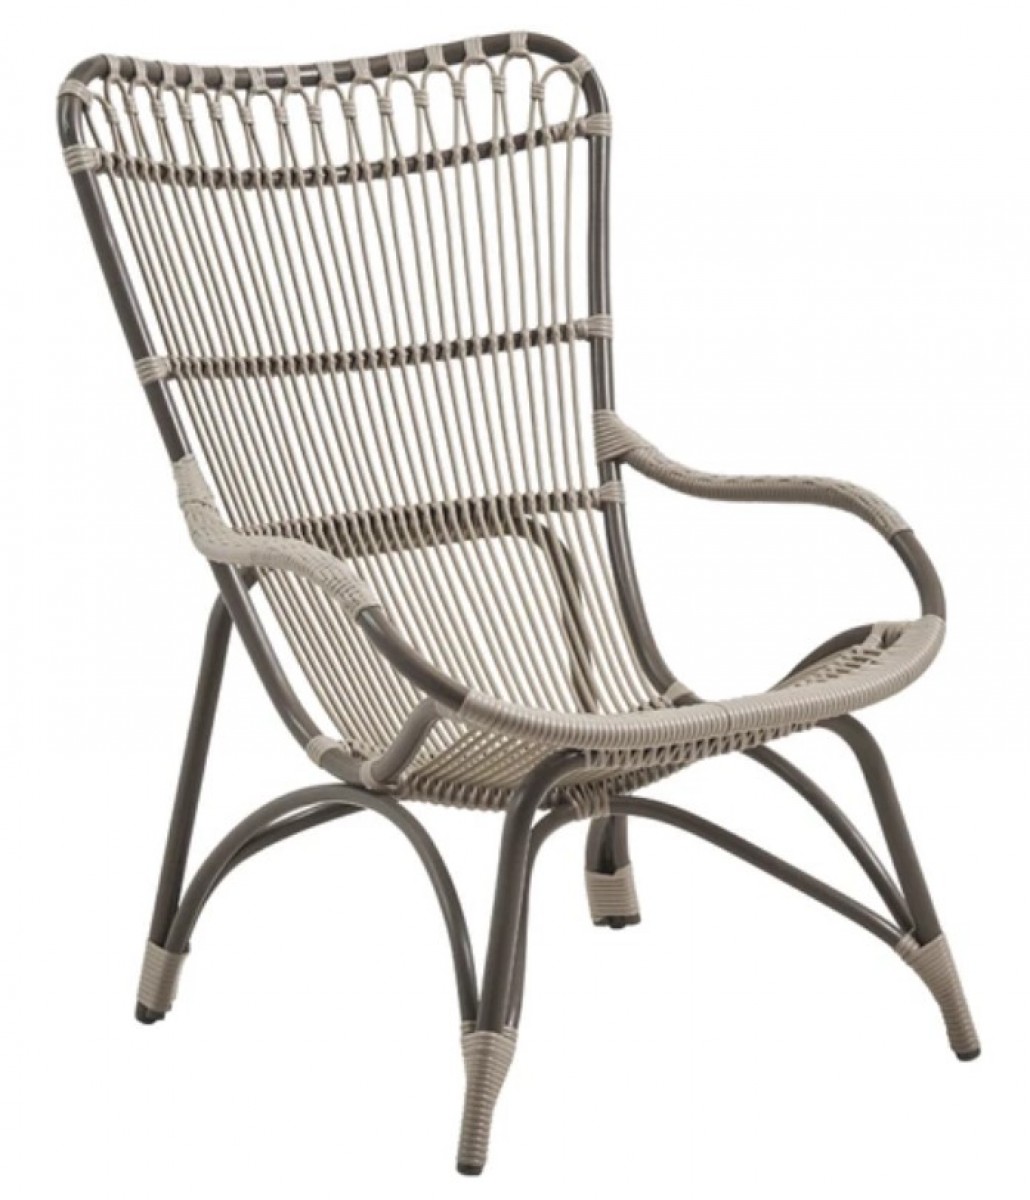 Monet Exterior Lounge Chair, without Cushion